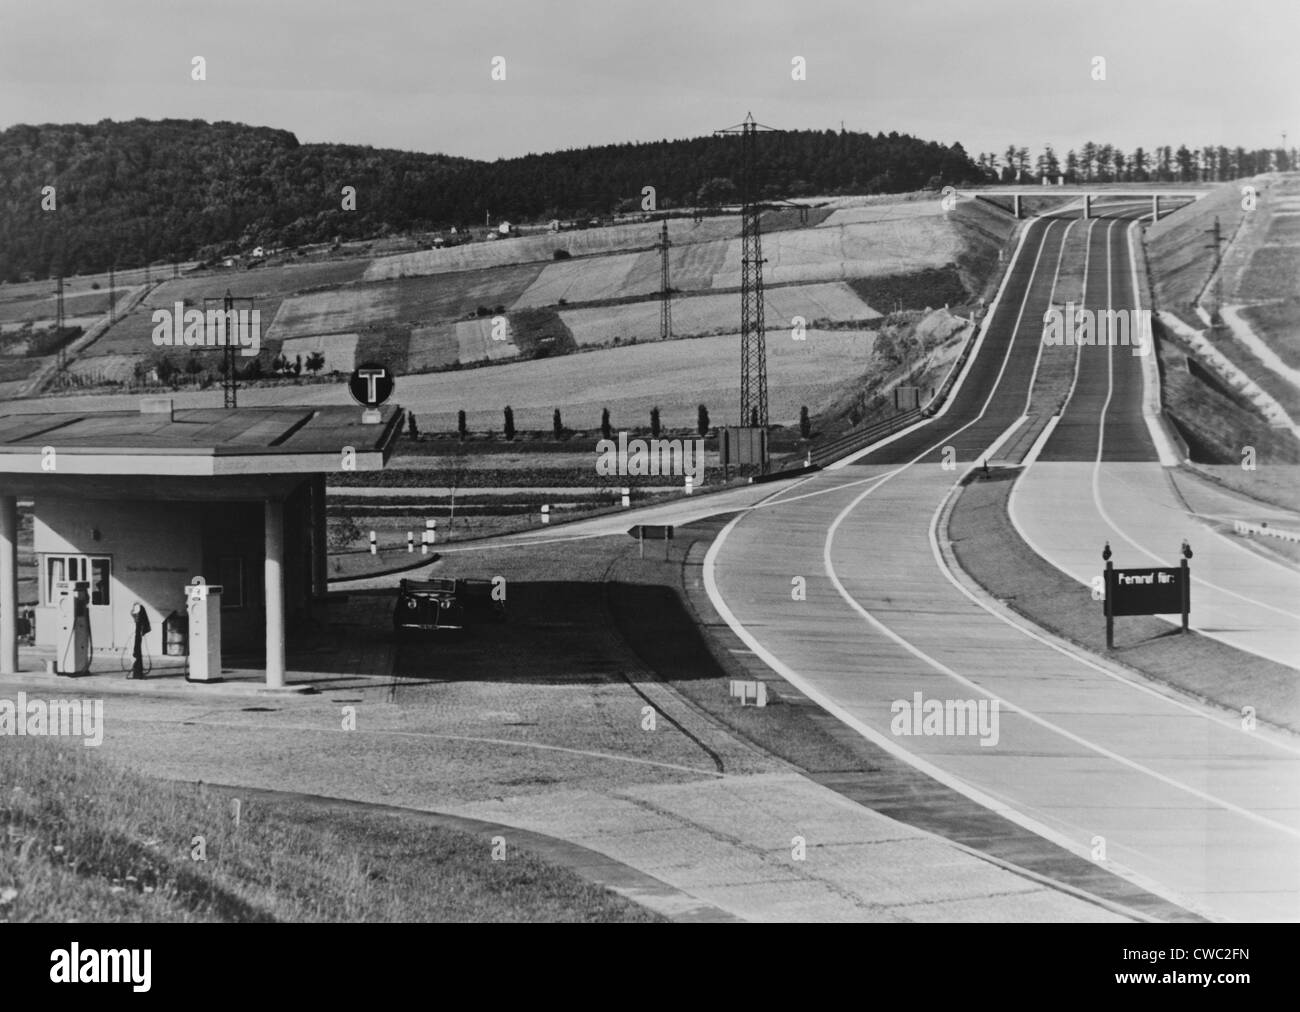 Service Station of the German Autobahn a four lane divided highway with entrance and exit ramps. Ca. 1938. LC-USZ62-128818 Stock Photo